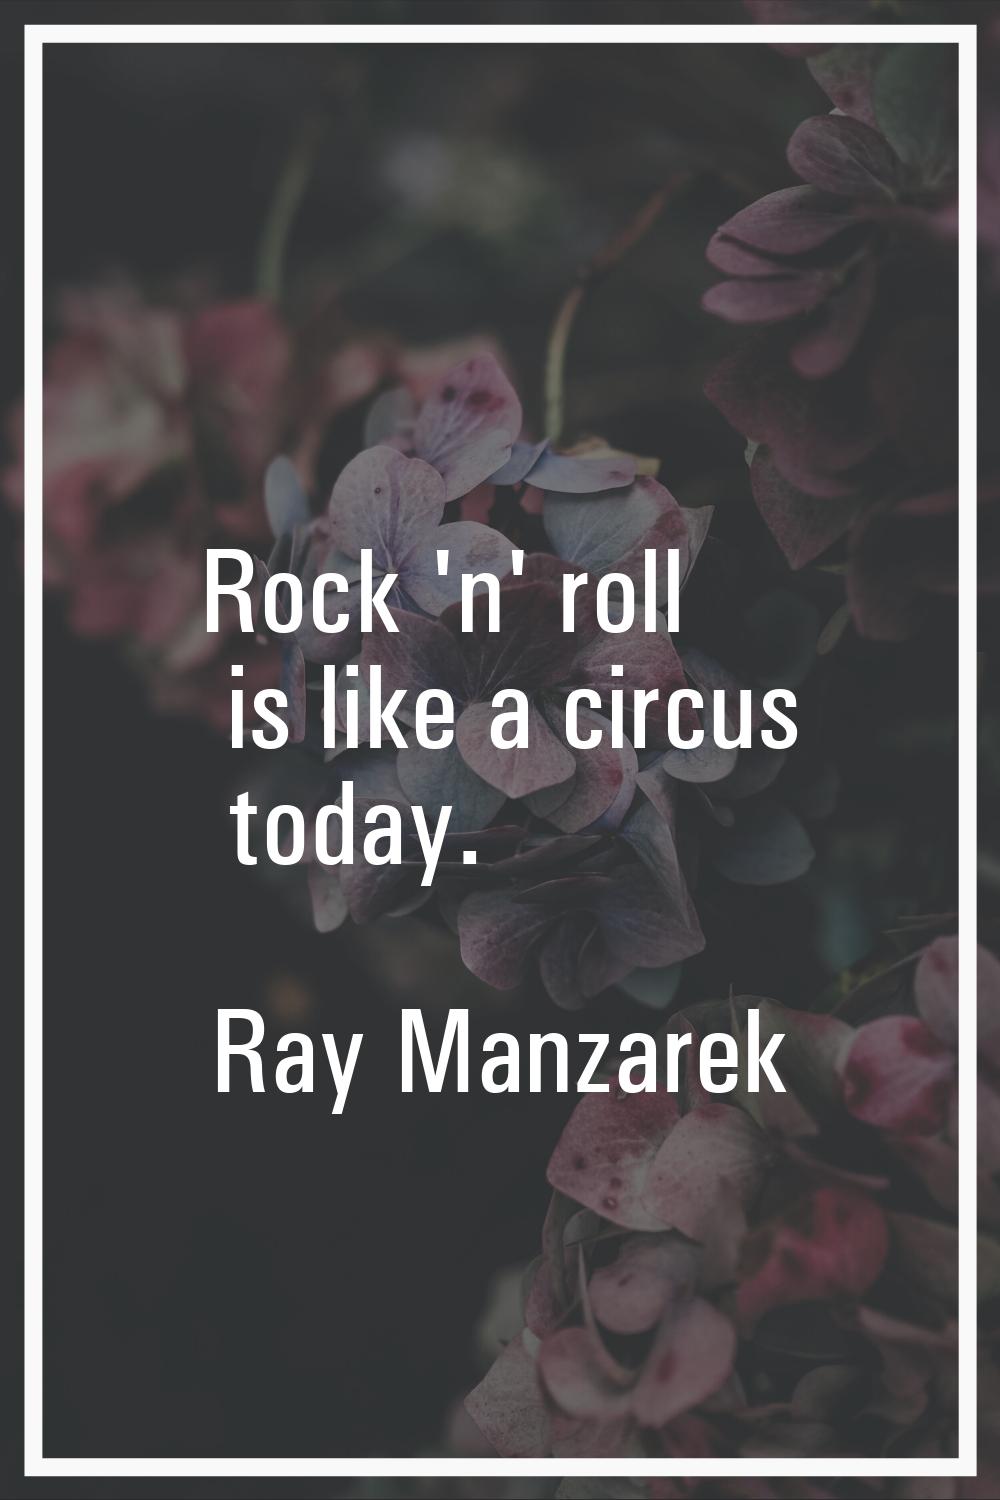 Rock 'n' roll is like a circus today.